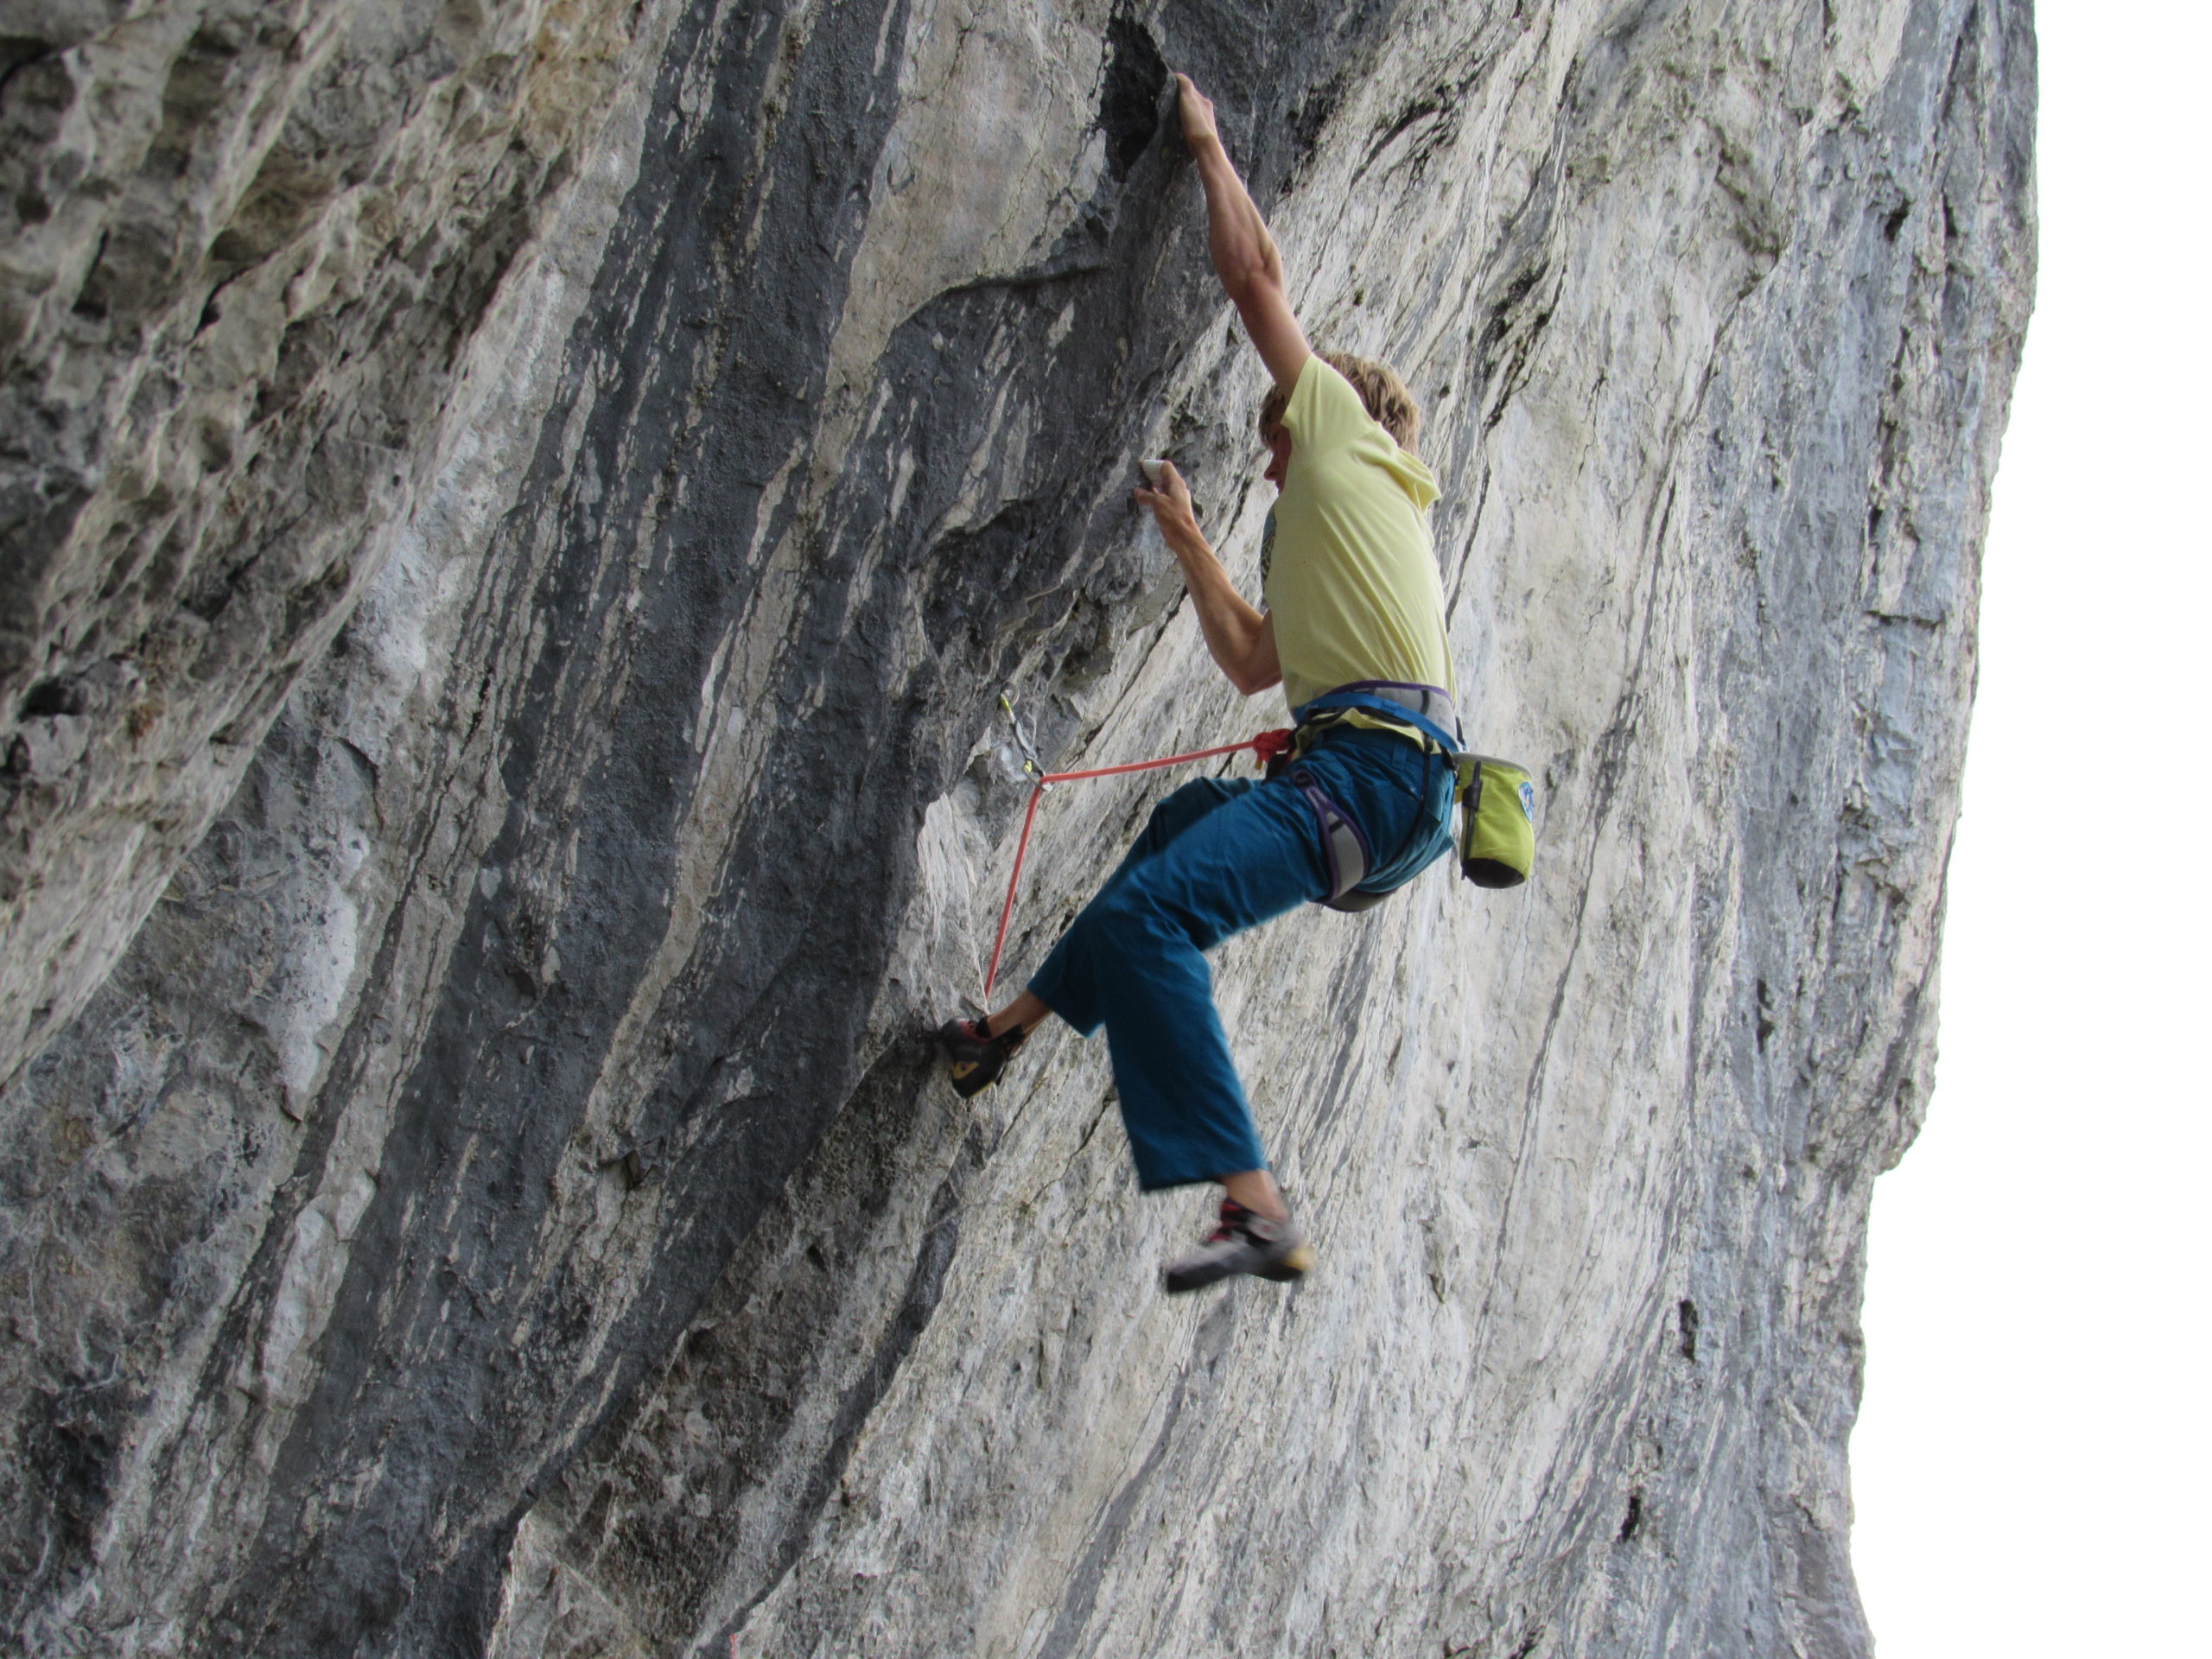 Five Things to Know About Canadian Sport Climbing - Gripped Magazine